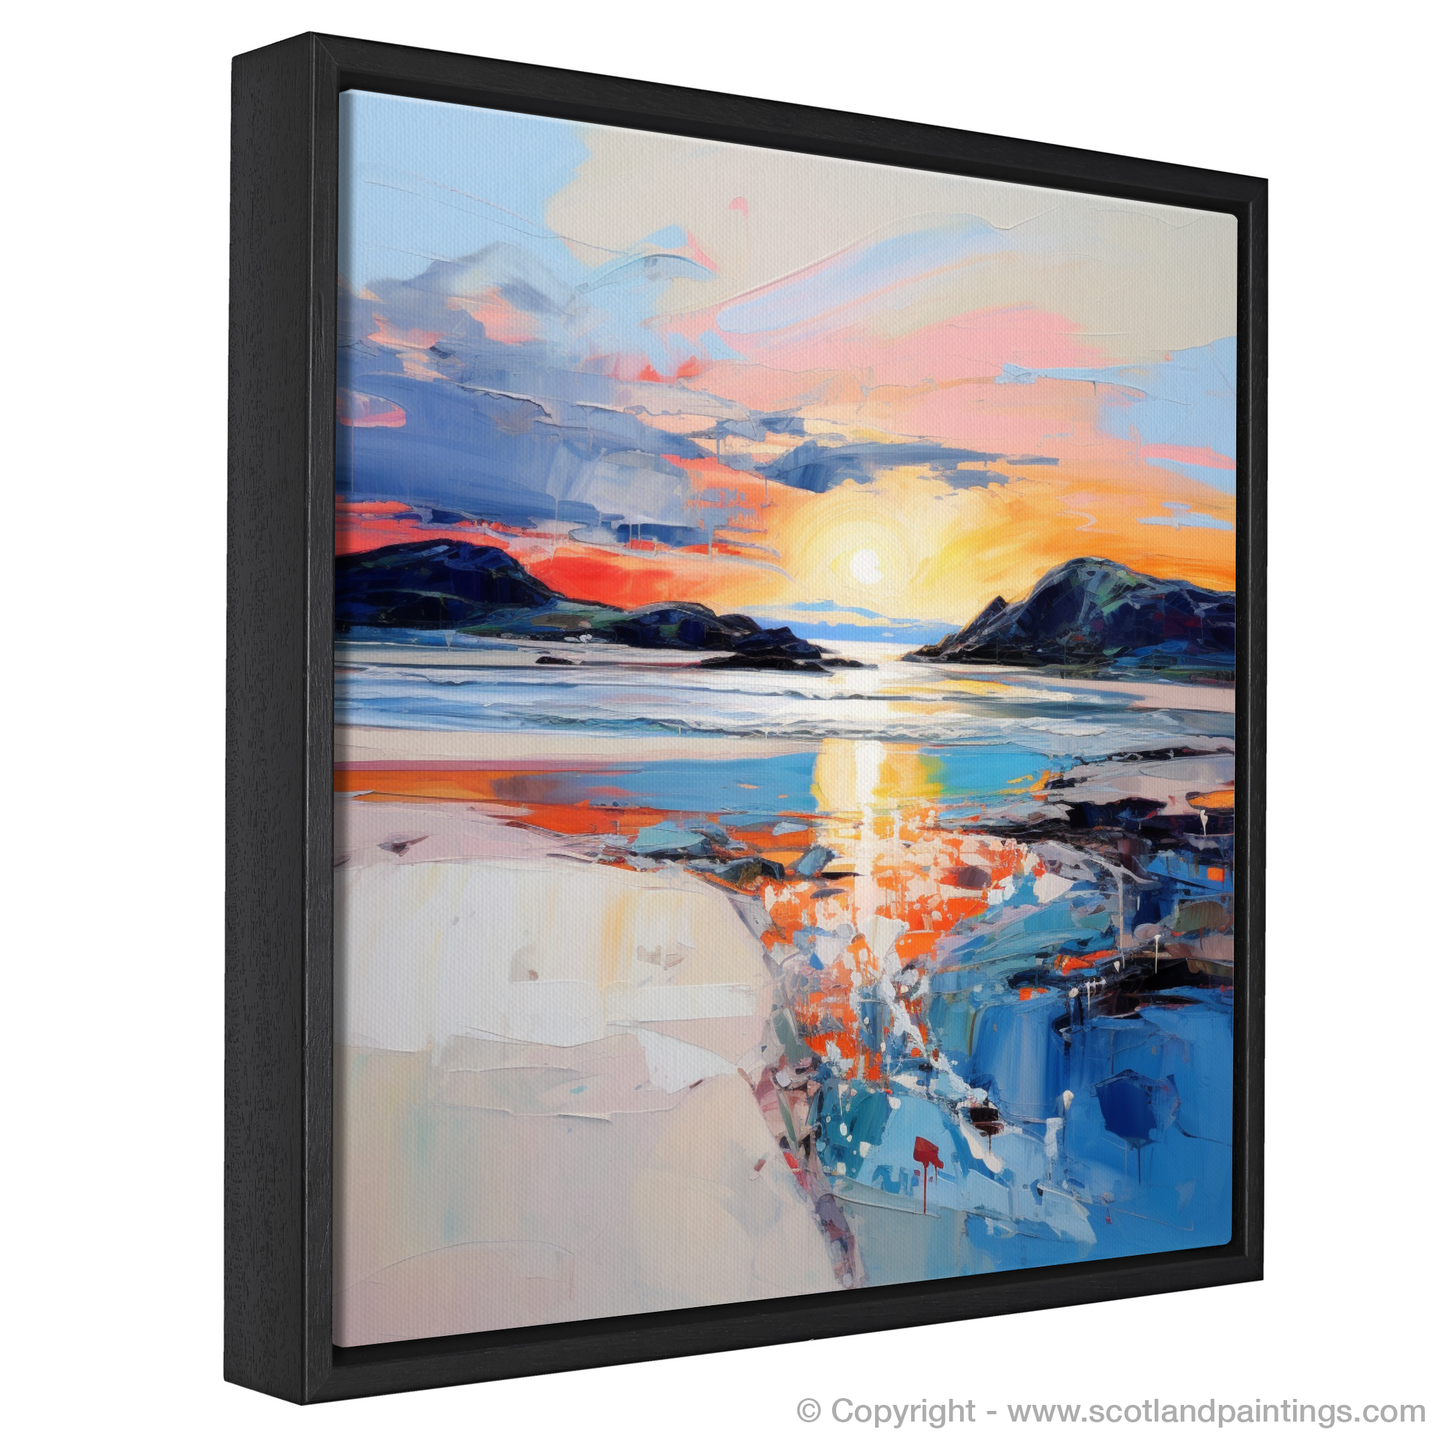 Painting and Art Print of Traigh Mhor at sunset entitled "Fiery Embrace of Traigh Mhor at Sunset".